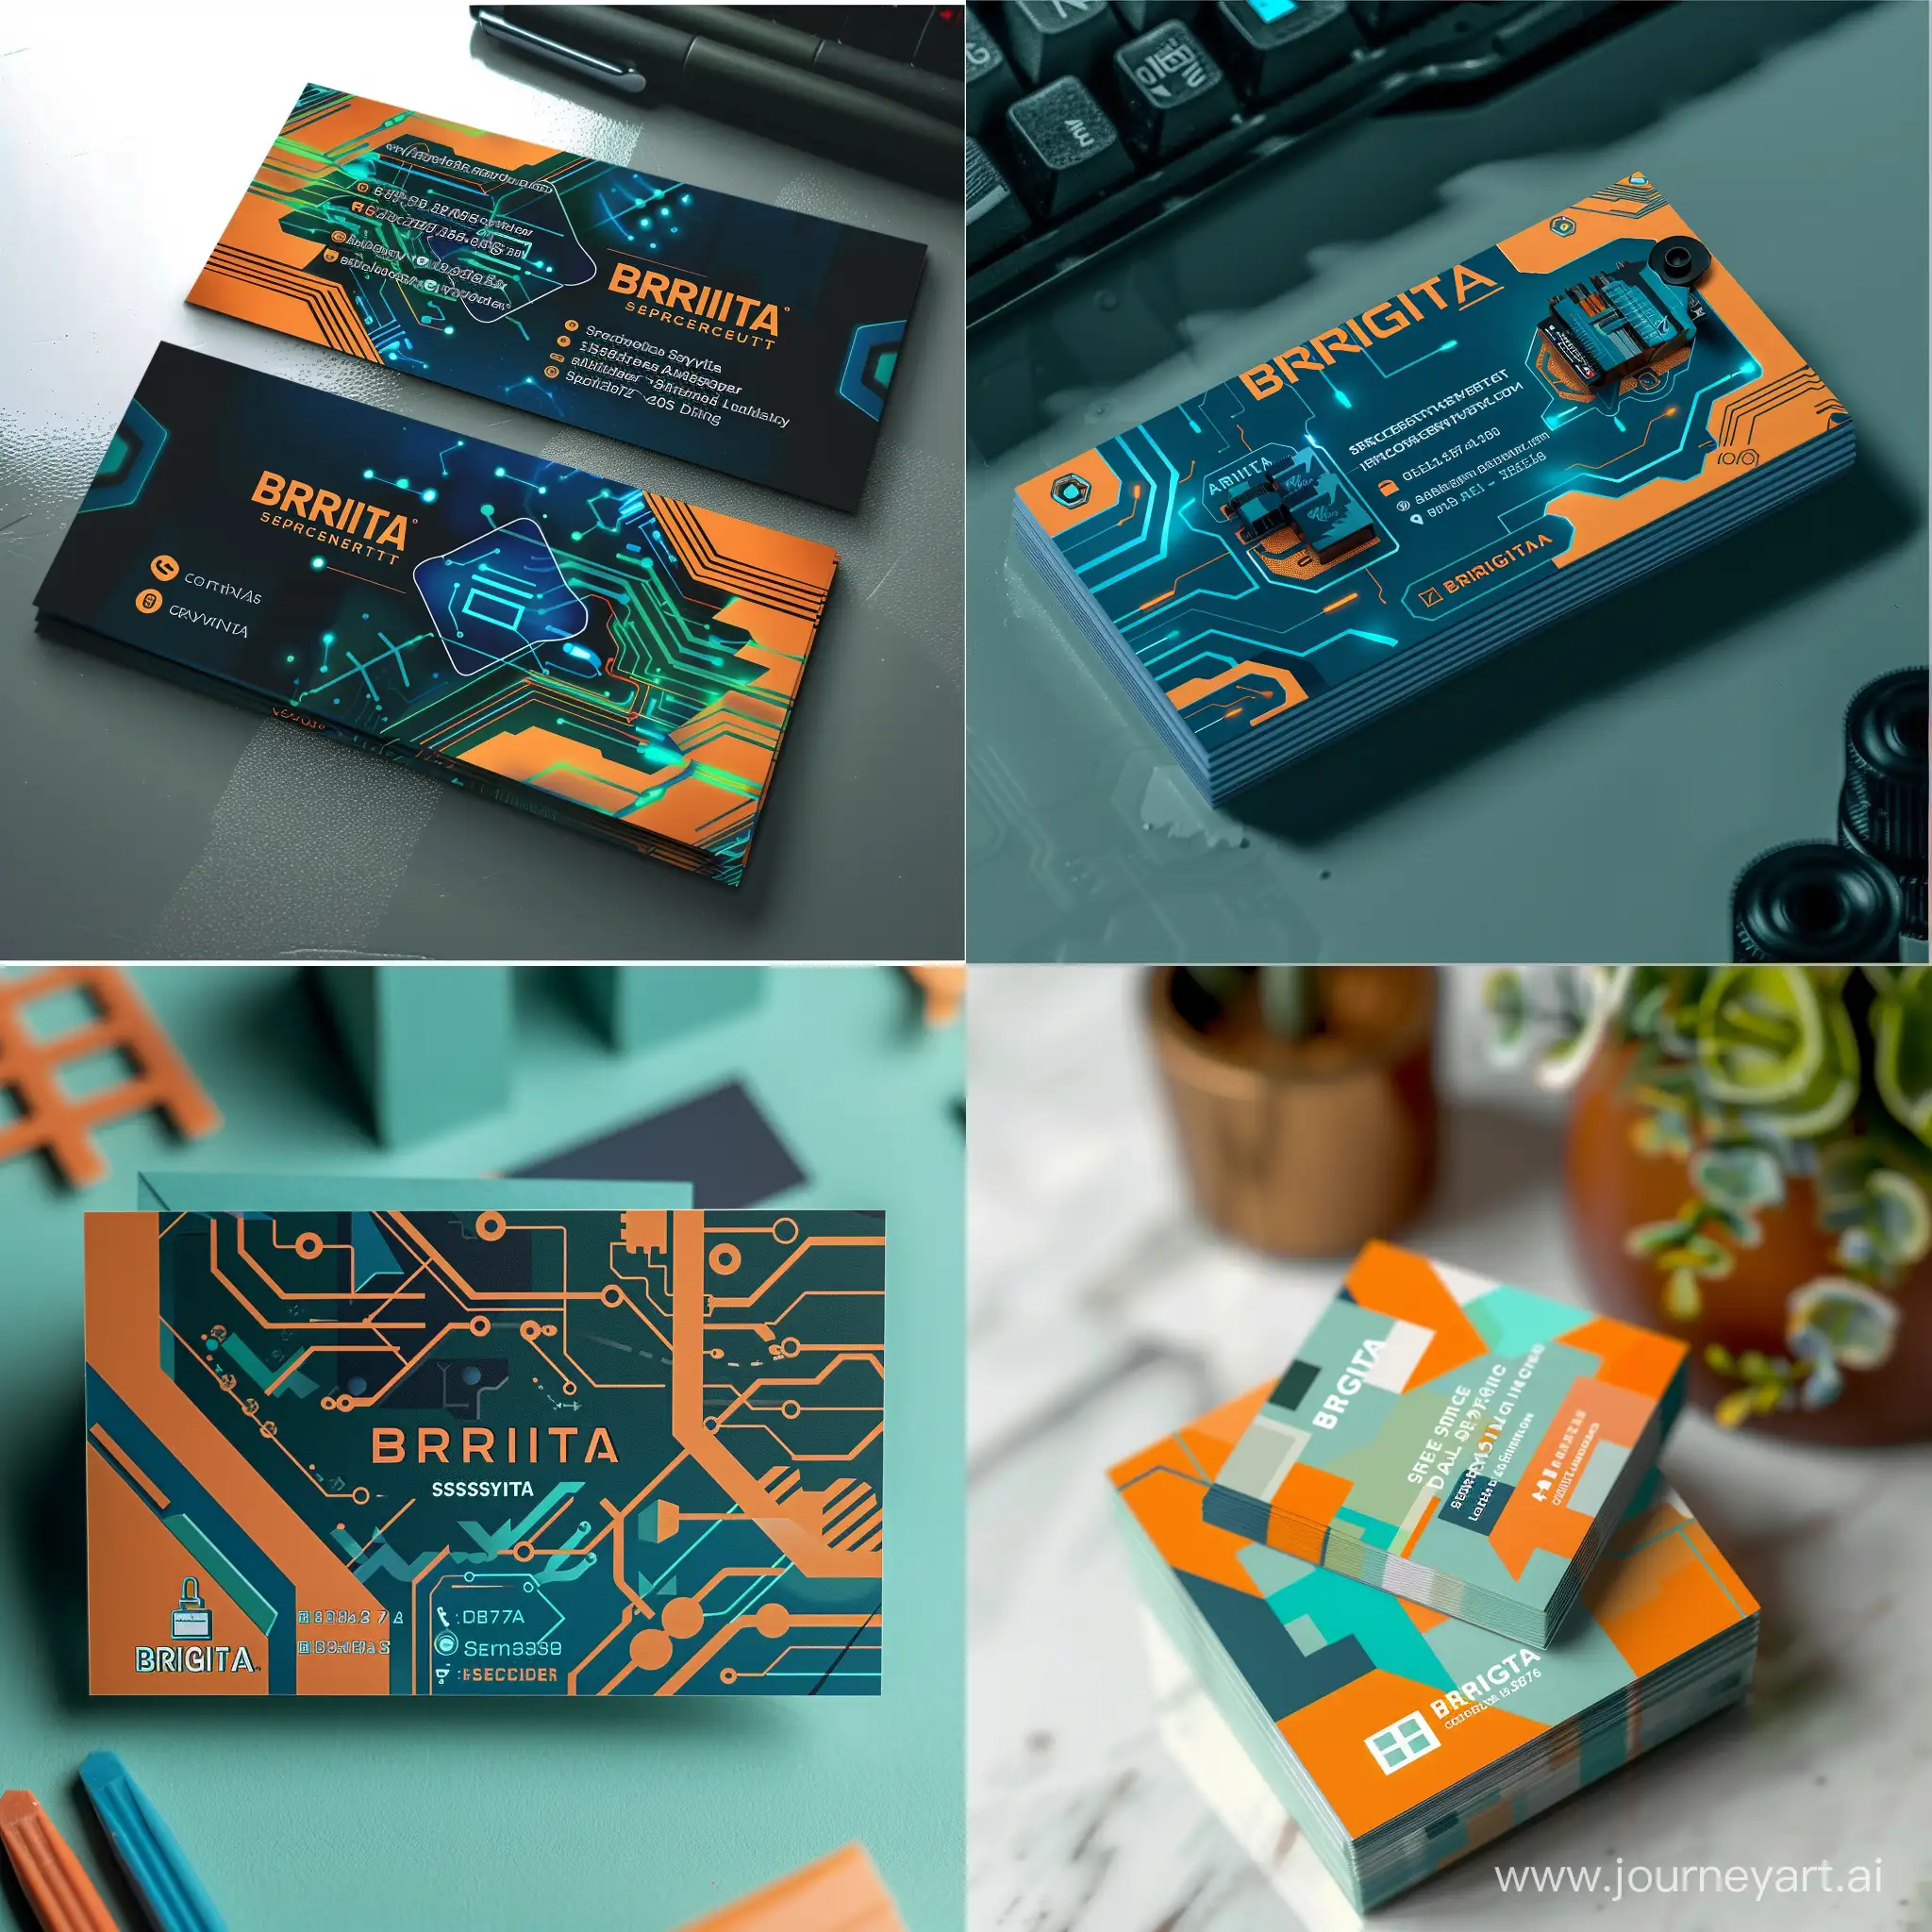 Come up with a design of a business card  for the Security Systems Engine of the company name BRIGITA. The company provides information technology  and Cybersecurity services. The corporate colors are light orange, blue and light green. The design should be aboute to cyberpunk 2077 and industry style.